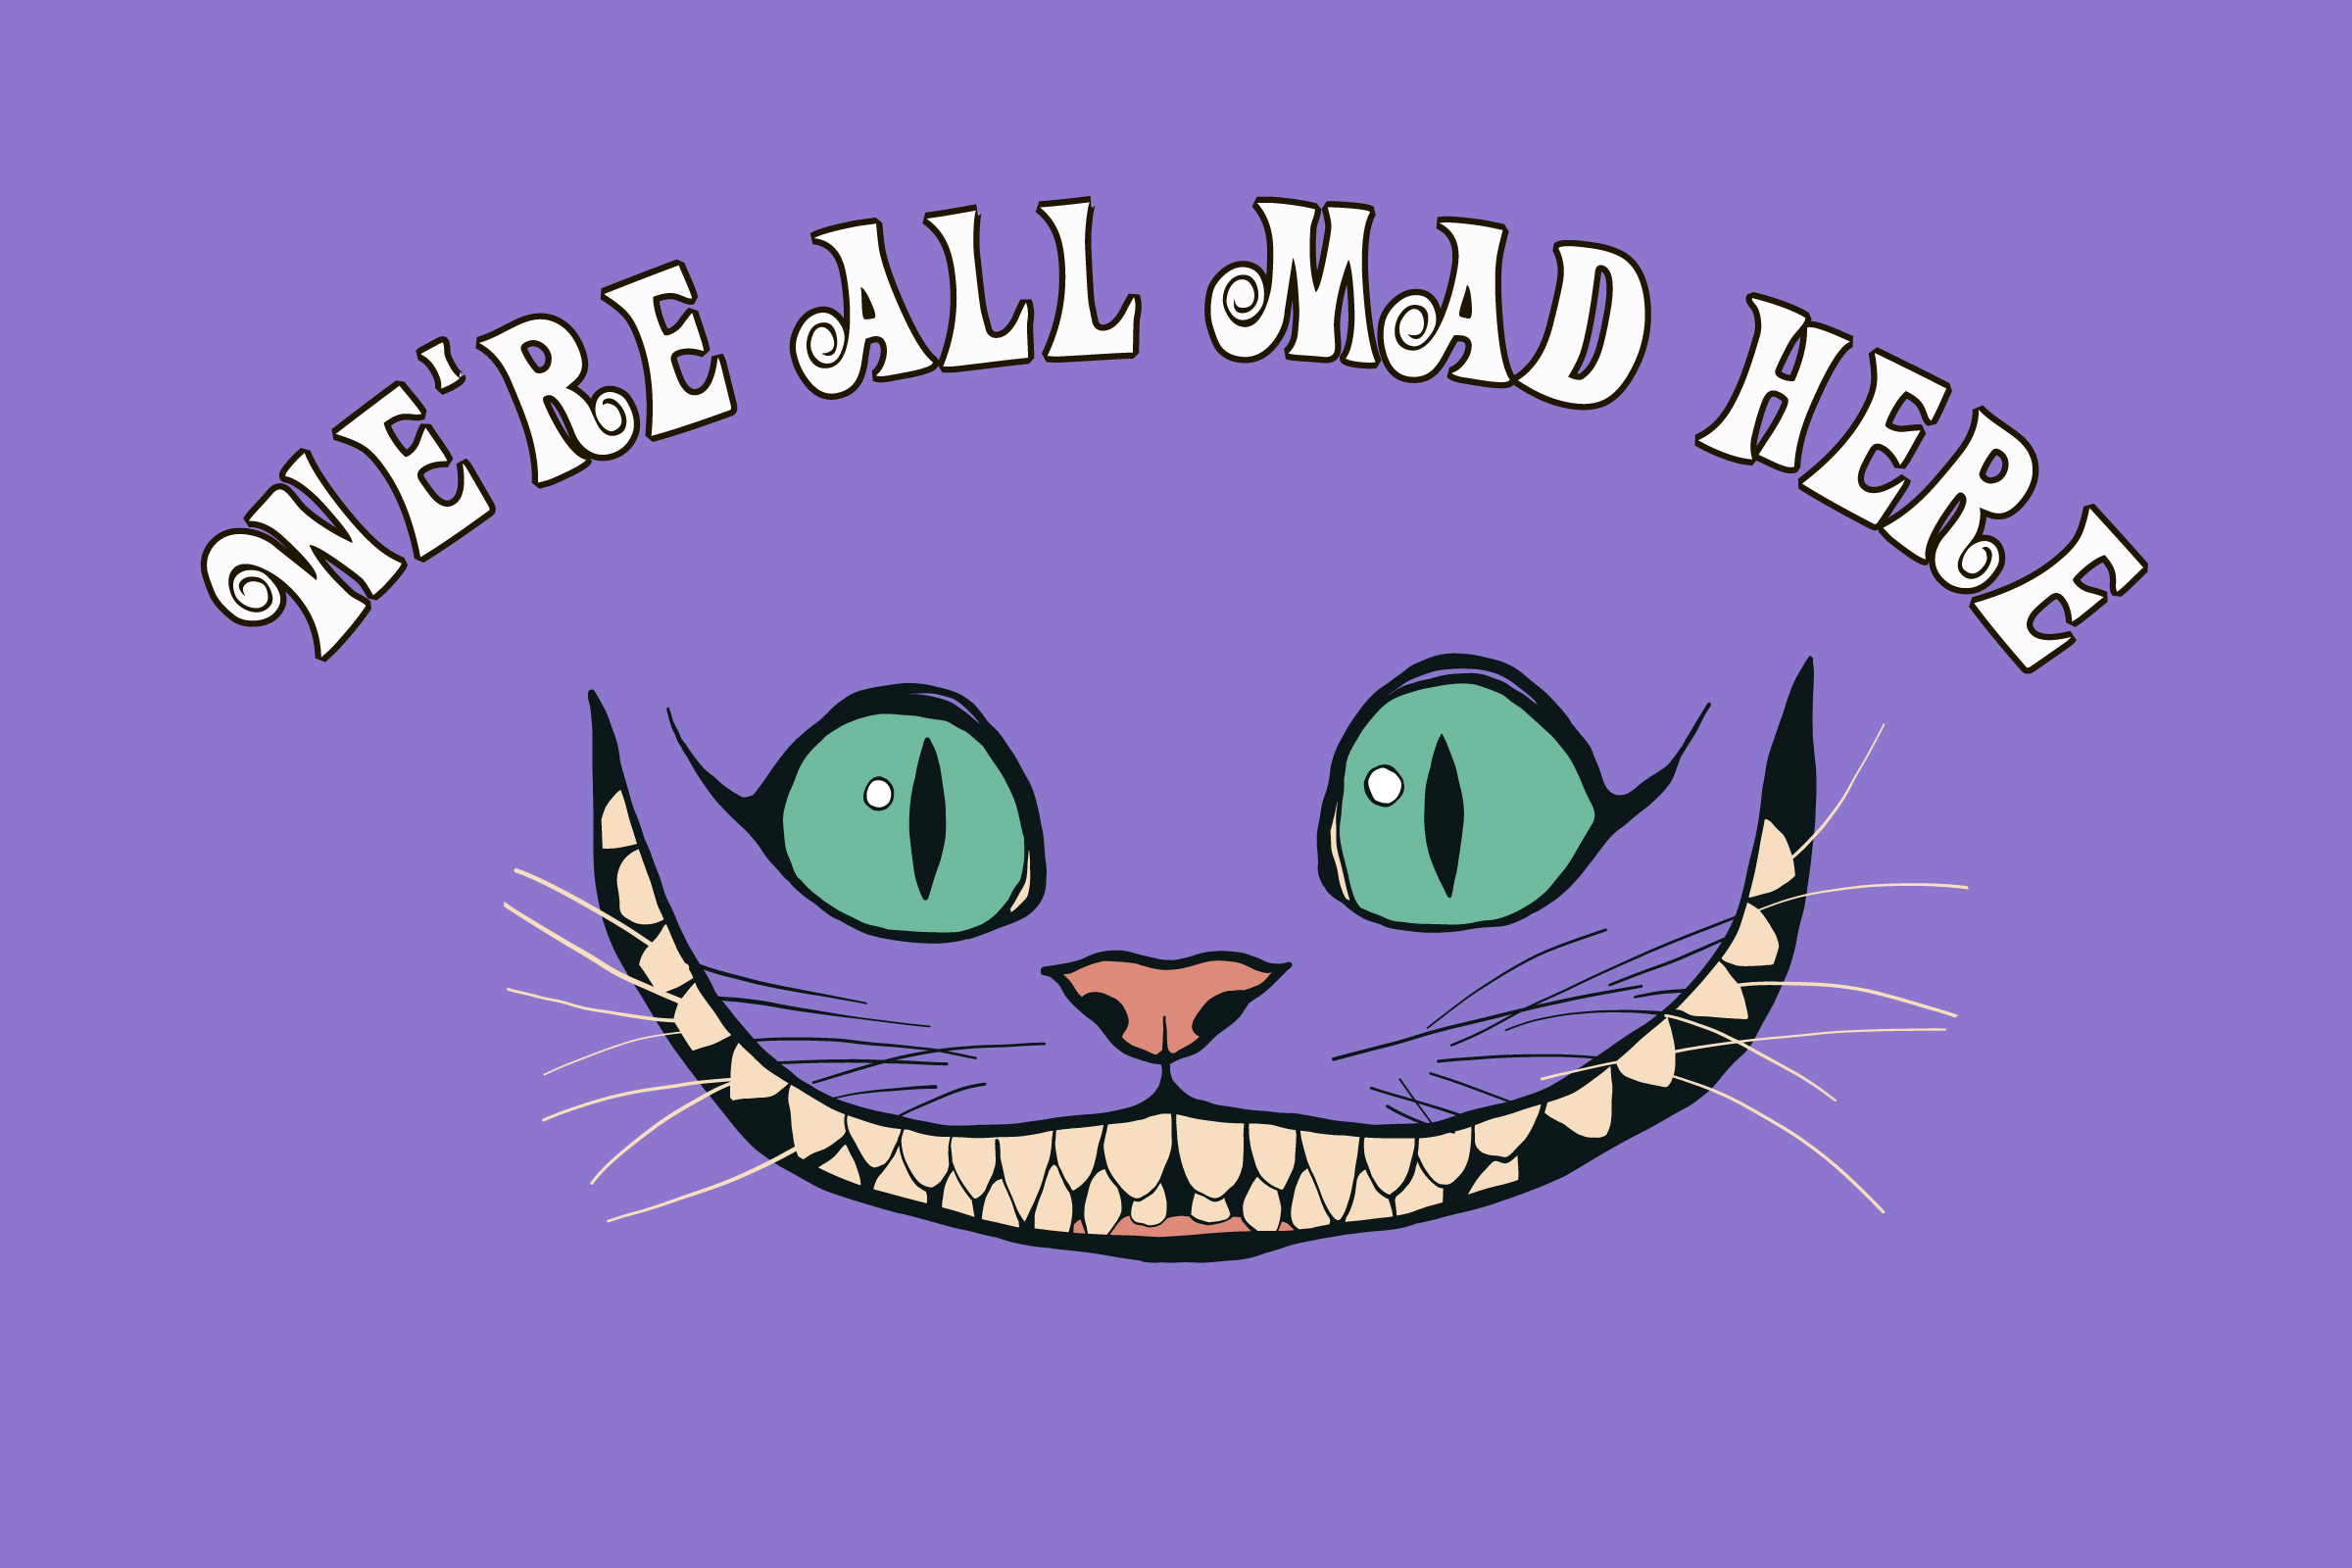 https://depositphotos.com/172423678/stock-illustration-smile-of-a-cheshire-cat.html